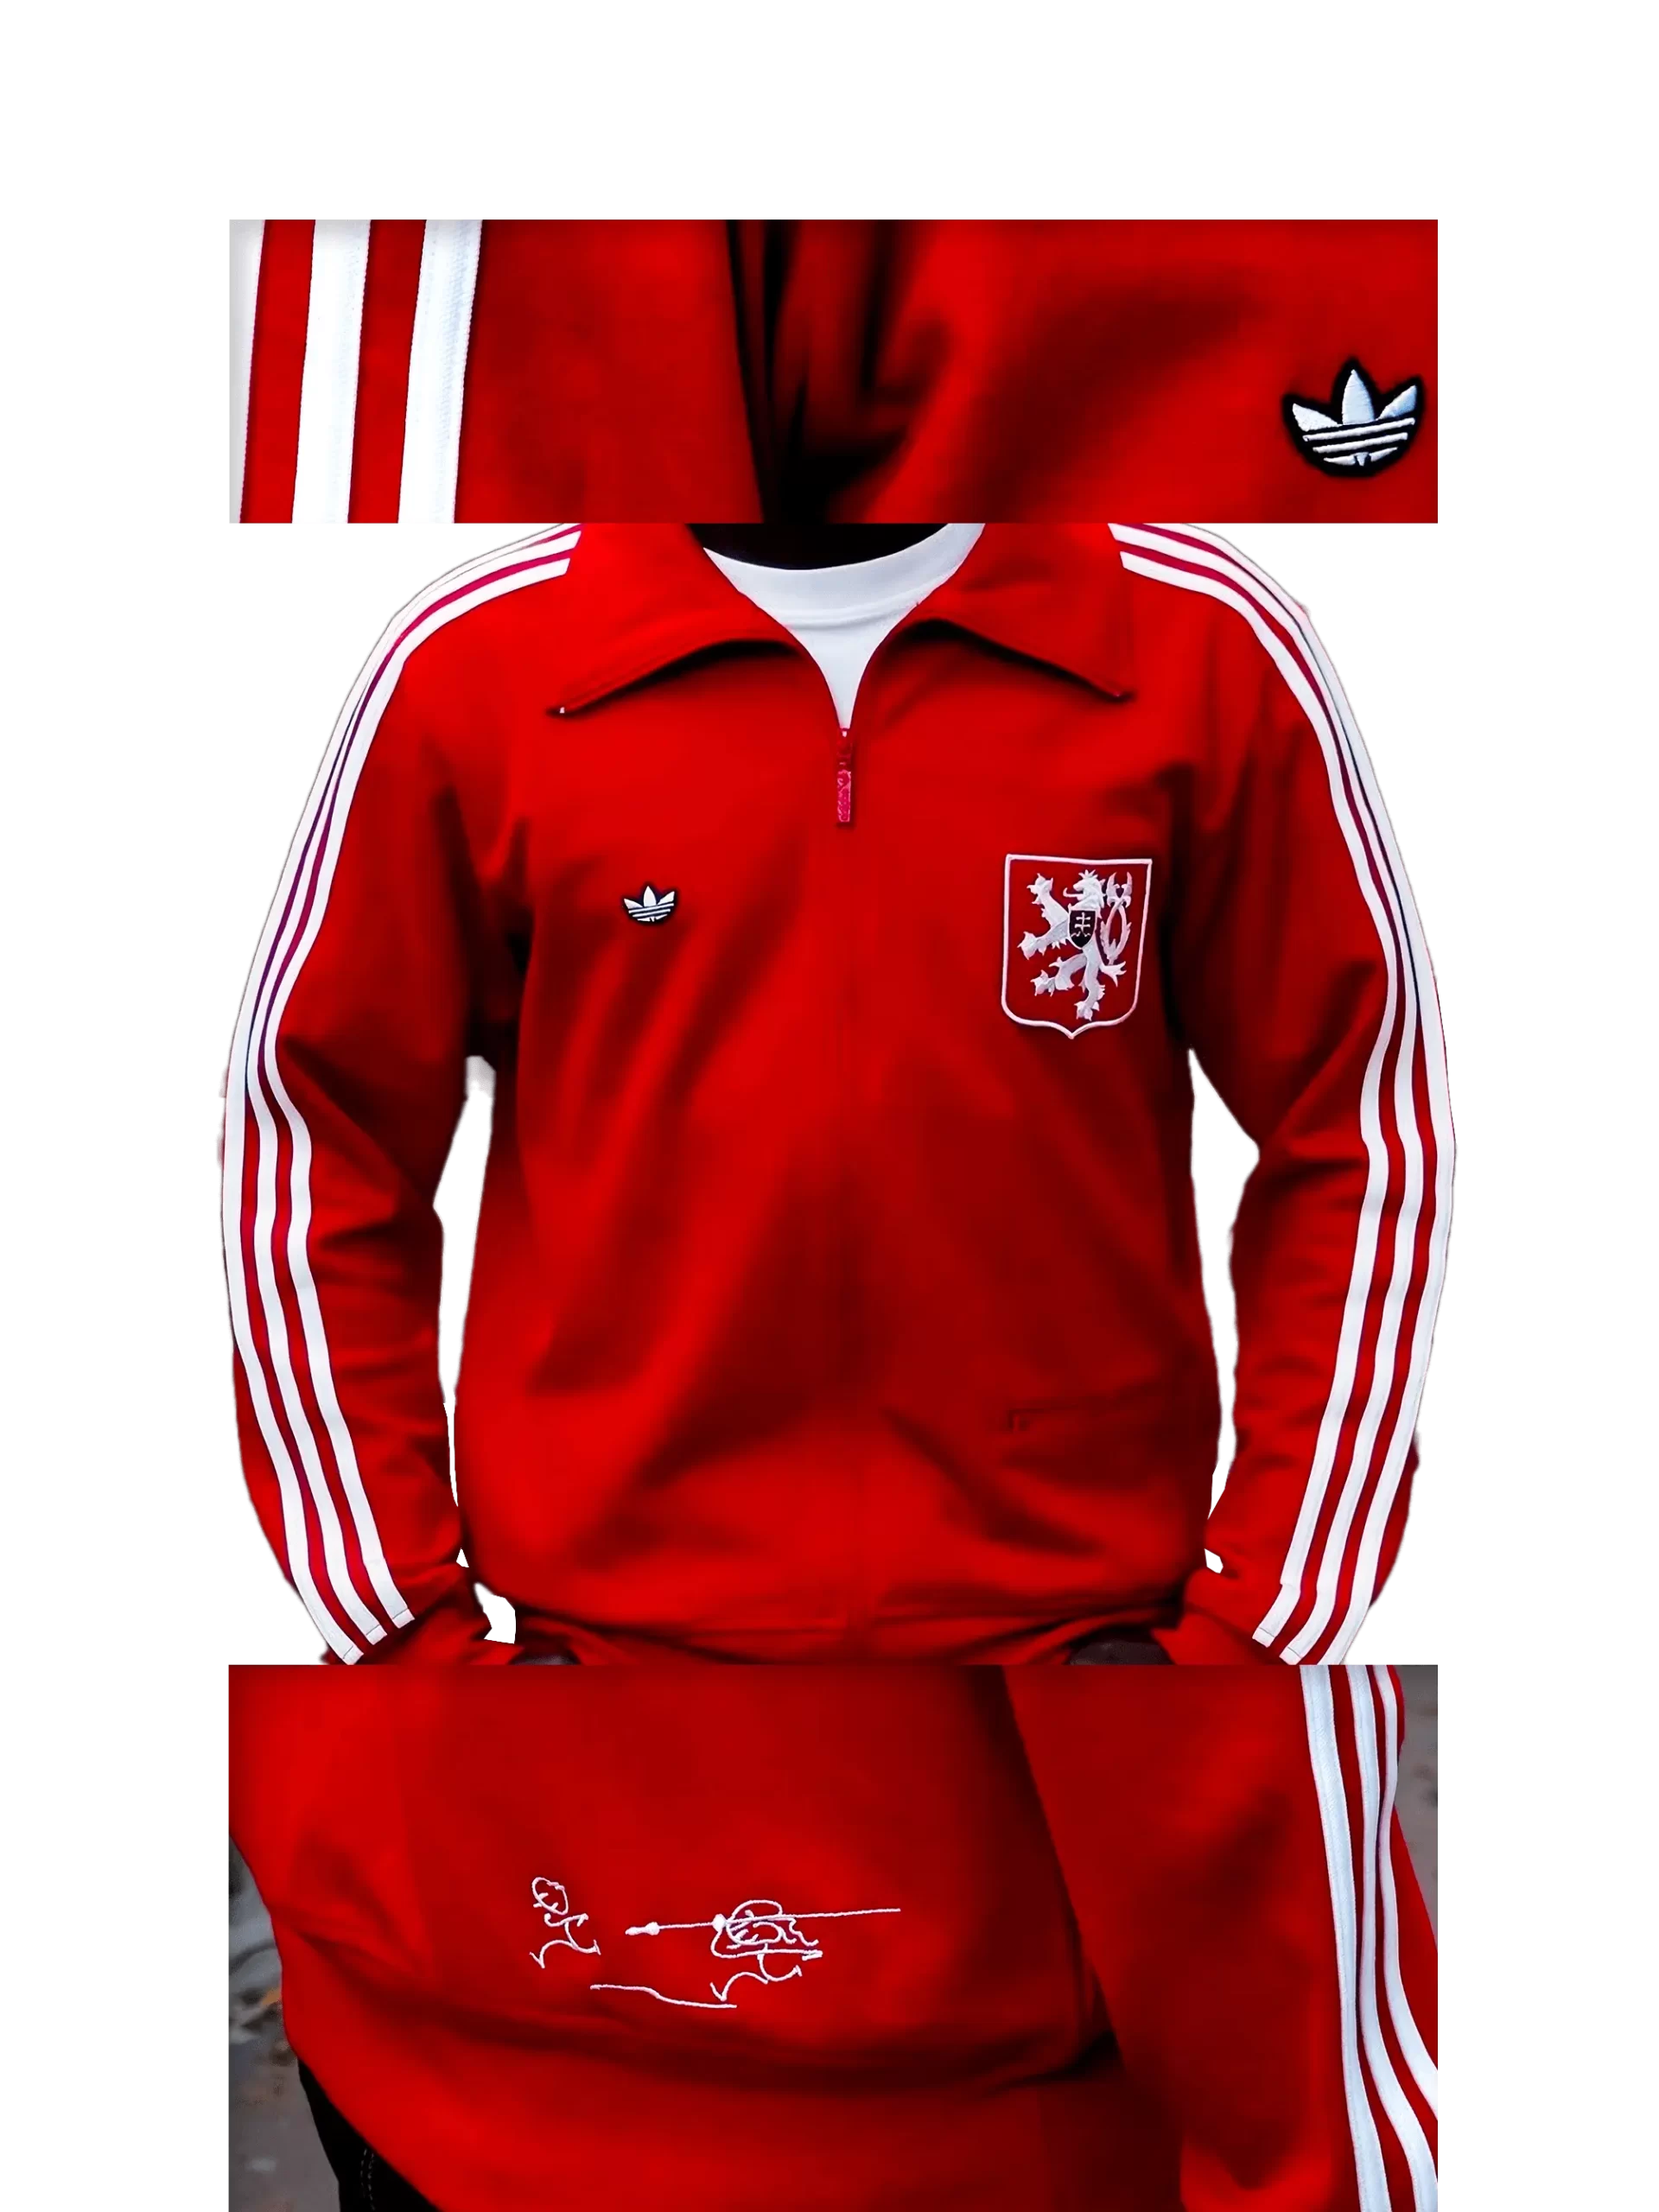 Men's 2007 Slovakia Love Track Top by Adidas Originals: Uncovered (EnLawded.com file #lmchk77046ip2y124799kg9st)